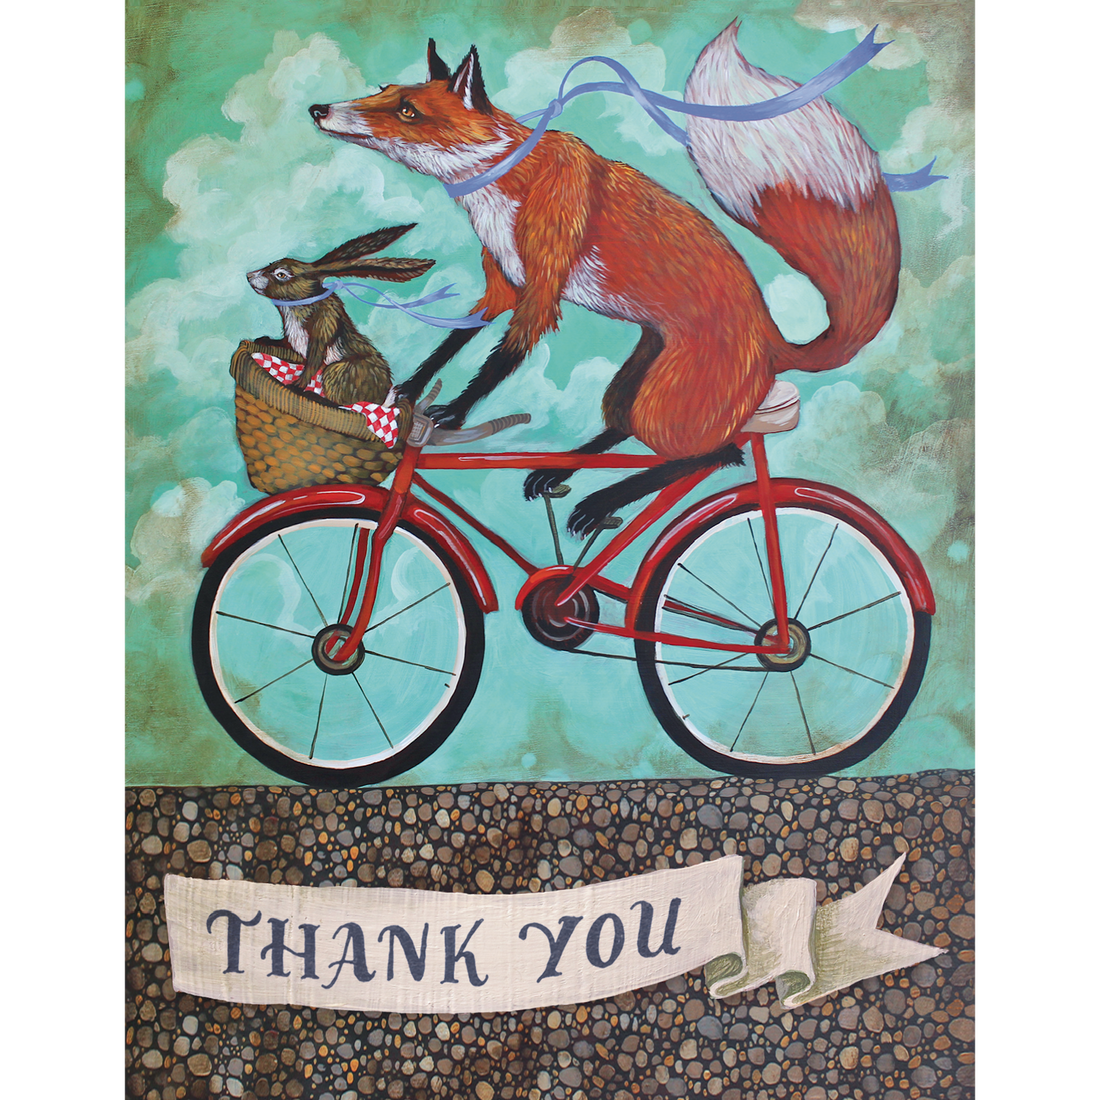 A whimsical illustration of a fox riding a red bicycle with a brown rabbit riding in the basket, both with blue ribbons trailing from their necks, over a cloudy teal sky on a pebbly ground, with &quot;THANK YOU&quot; printed on a white banner across the bottom of the card.